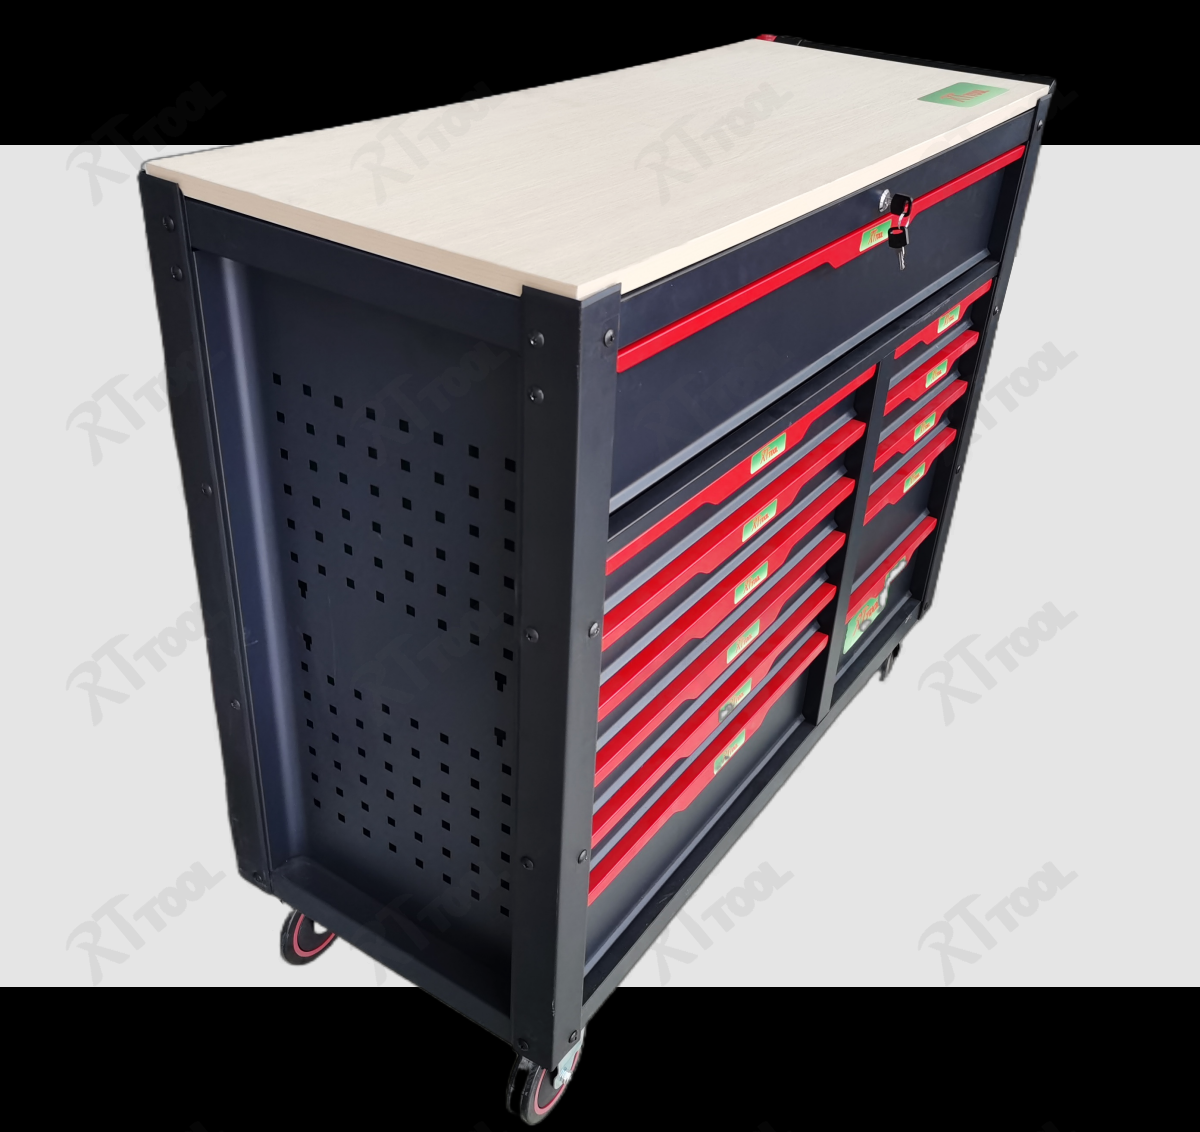 RTTOOL 359pcs tool trolley with metal steel storage workbench tool box tool chest cabinet